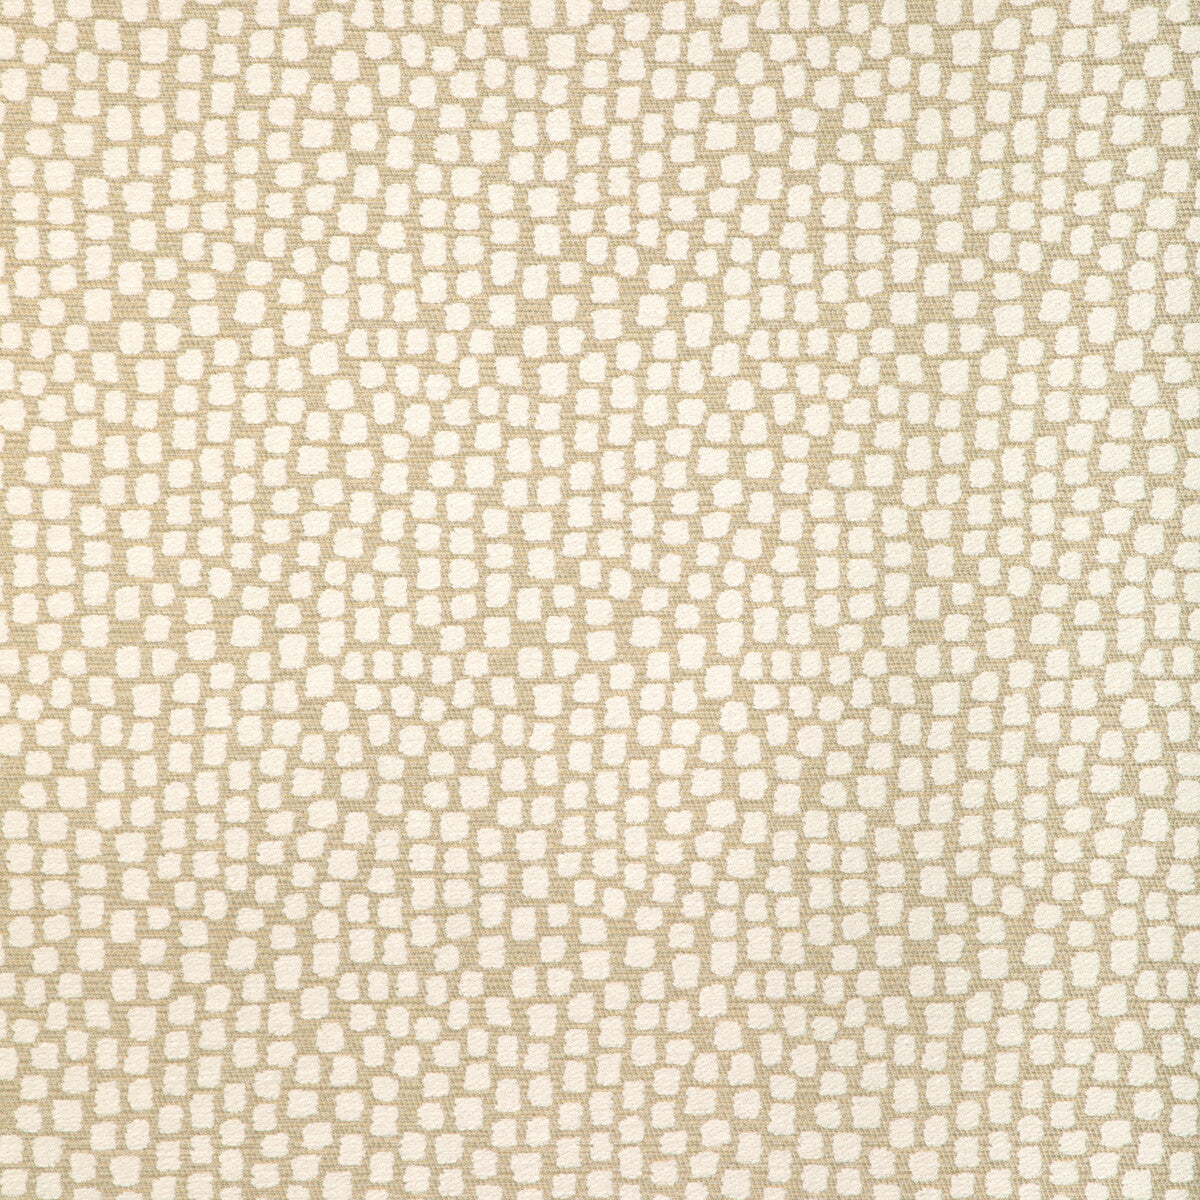 Step Above fabric in chablis color - pattern 37062.16.0 - by Kravet Design in the Thom Filicia Latitude collection